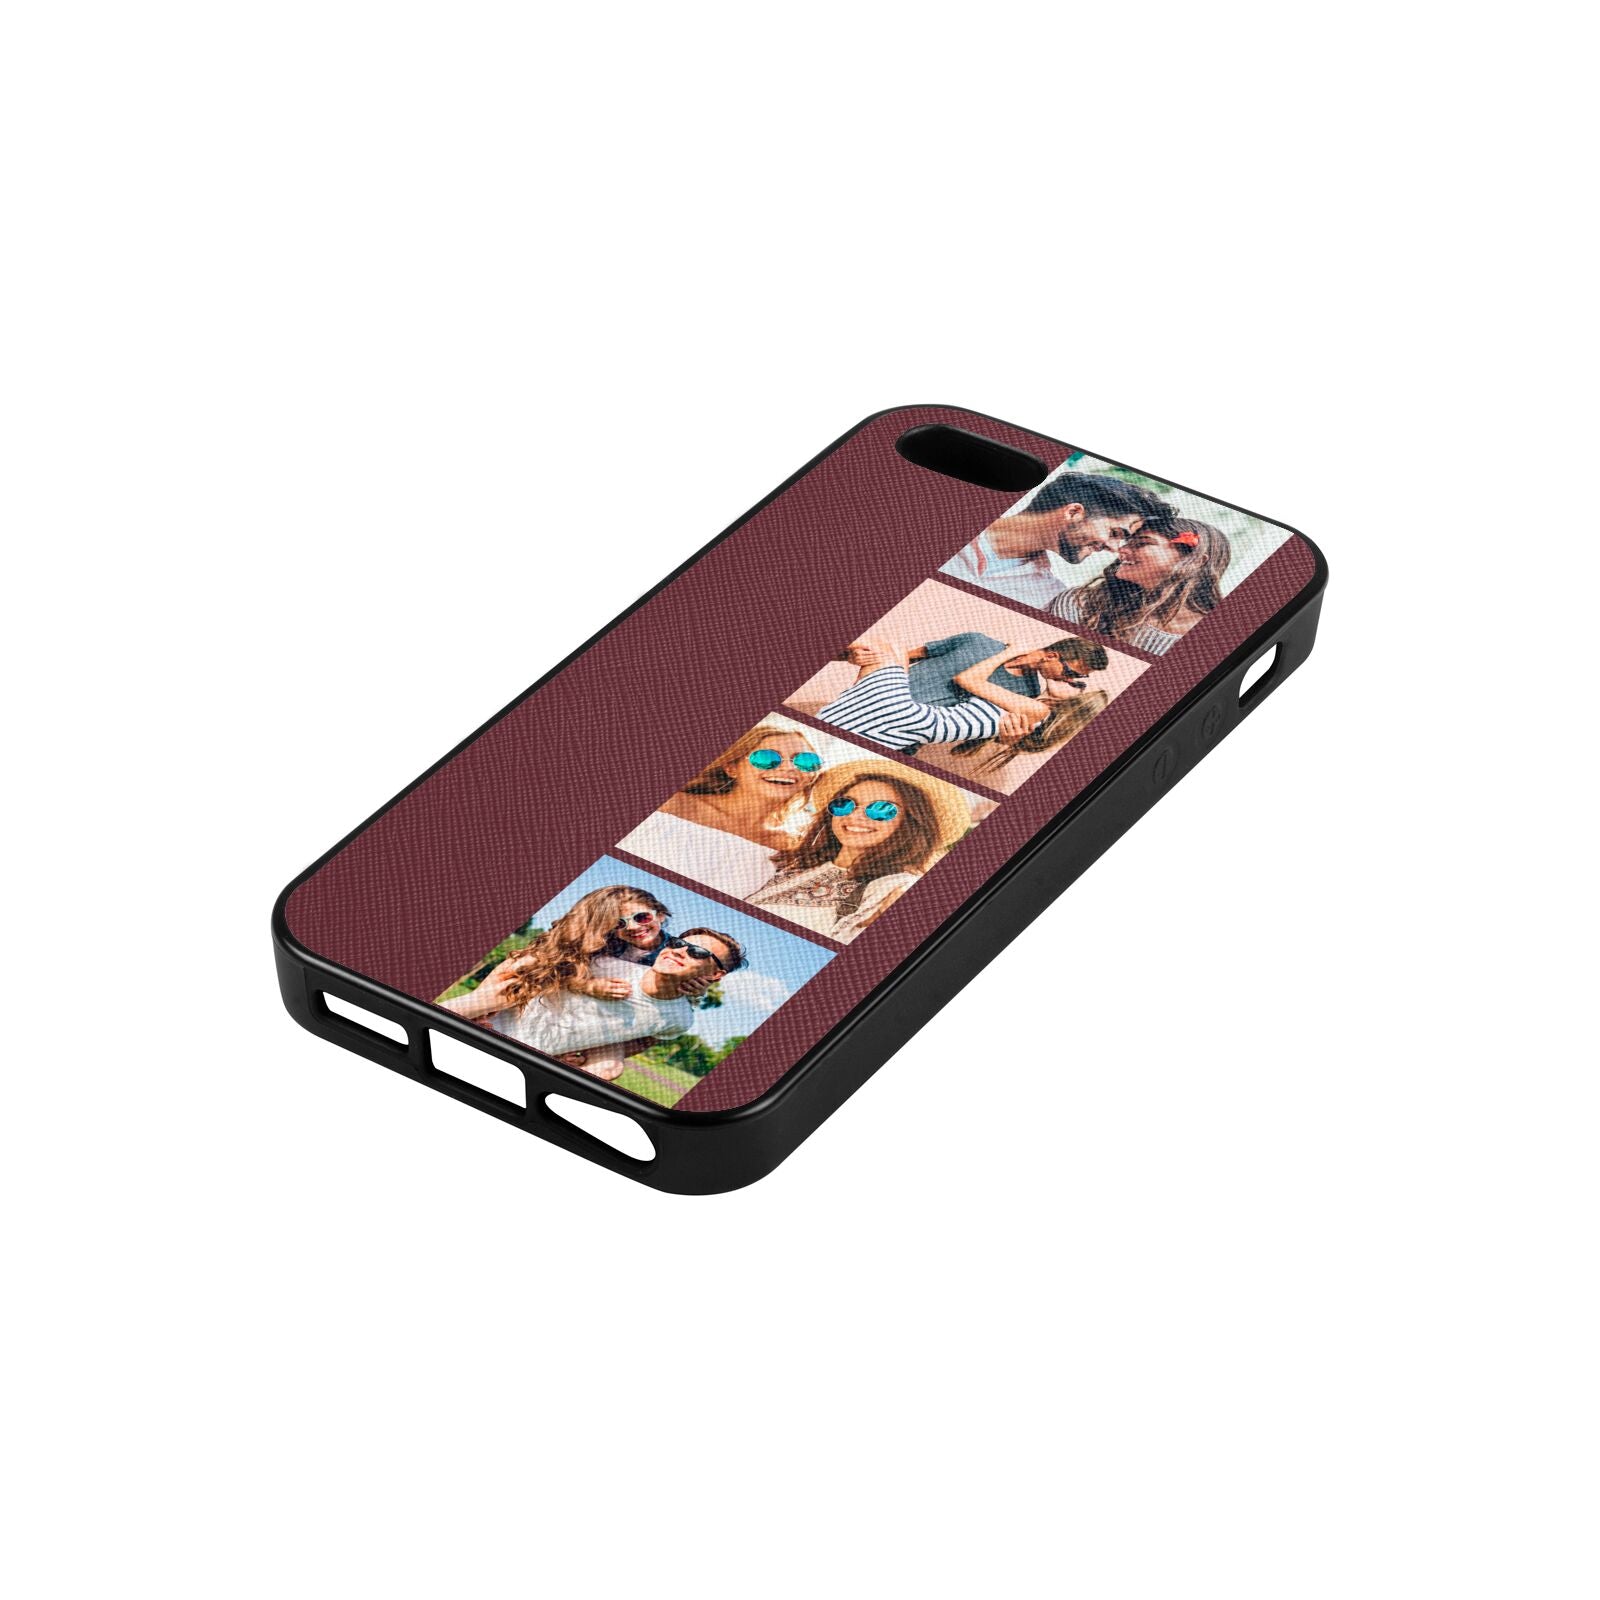 Photo Strip Montage Upload Rose Brown Saffiano Leather iPhone 5 Case Side Angle